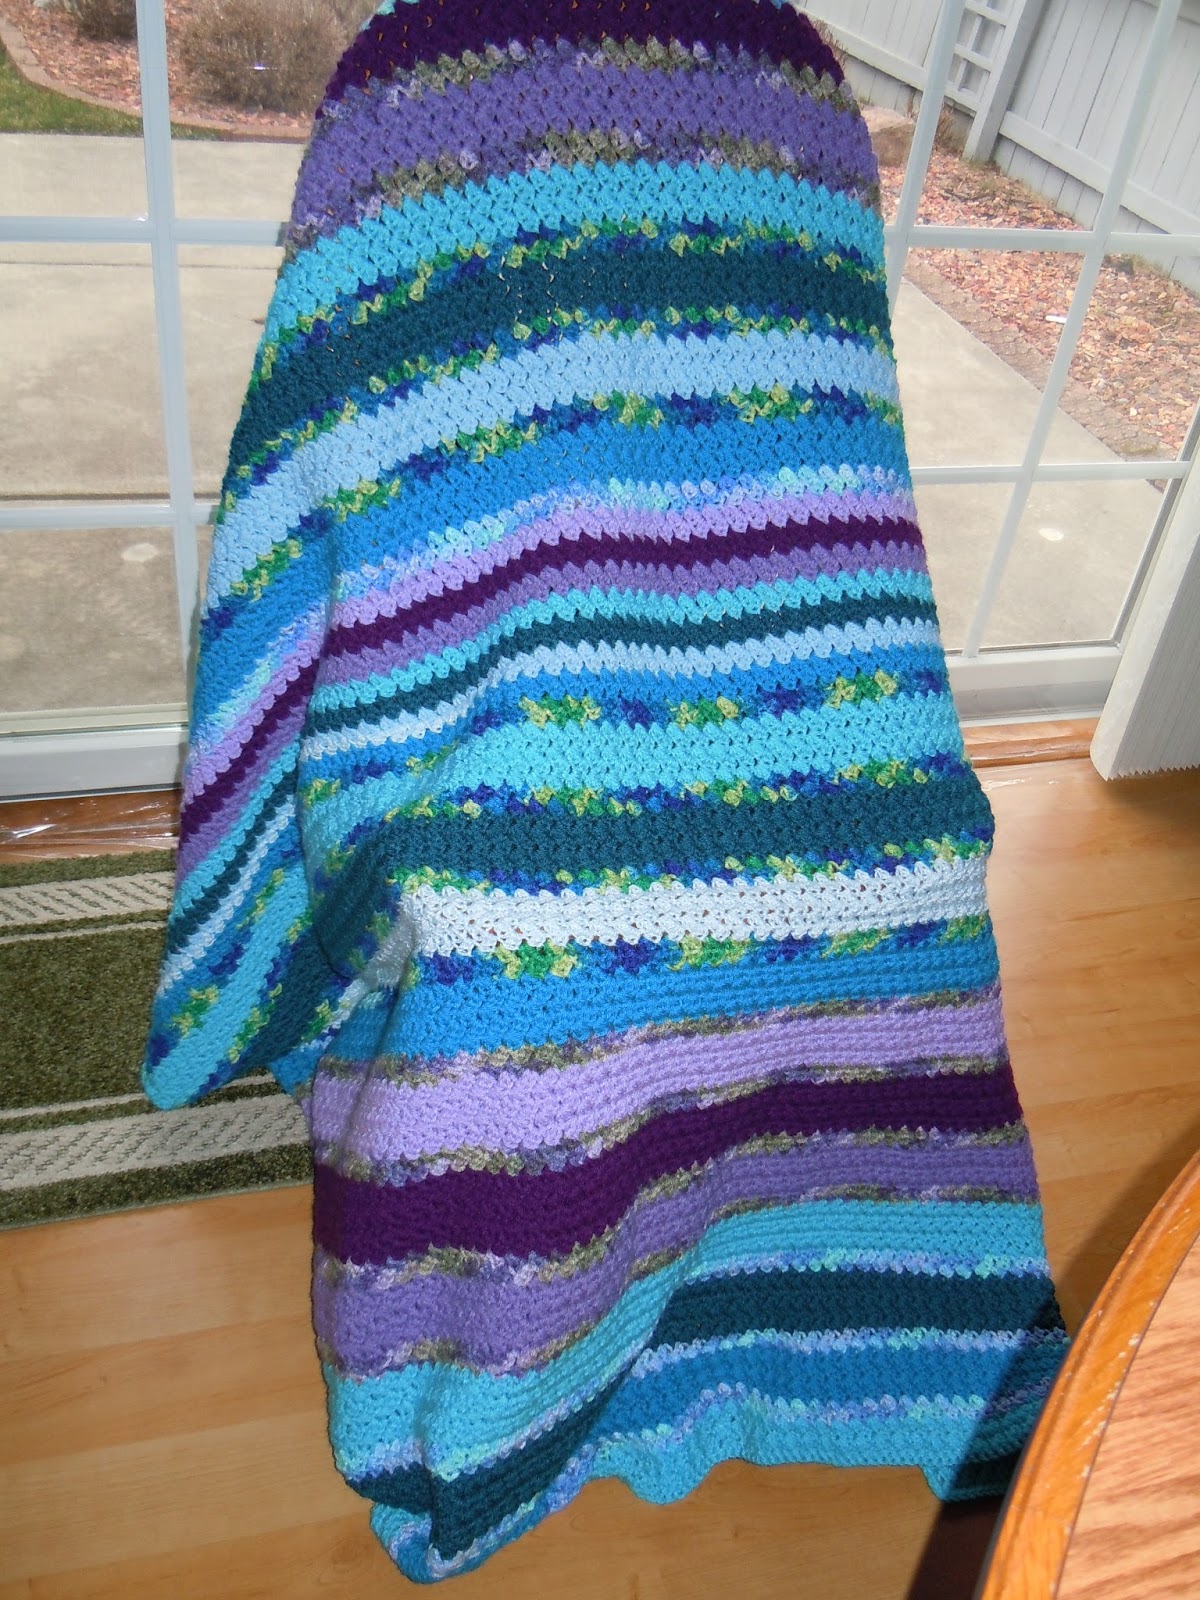 Shades of Blue, Green and Purple Crochet Afghan Patterns